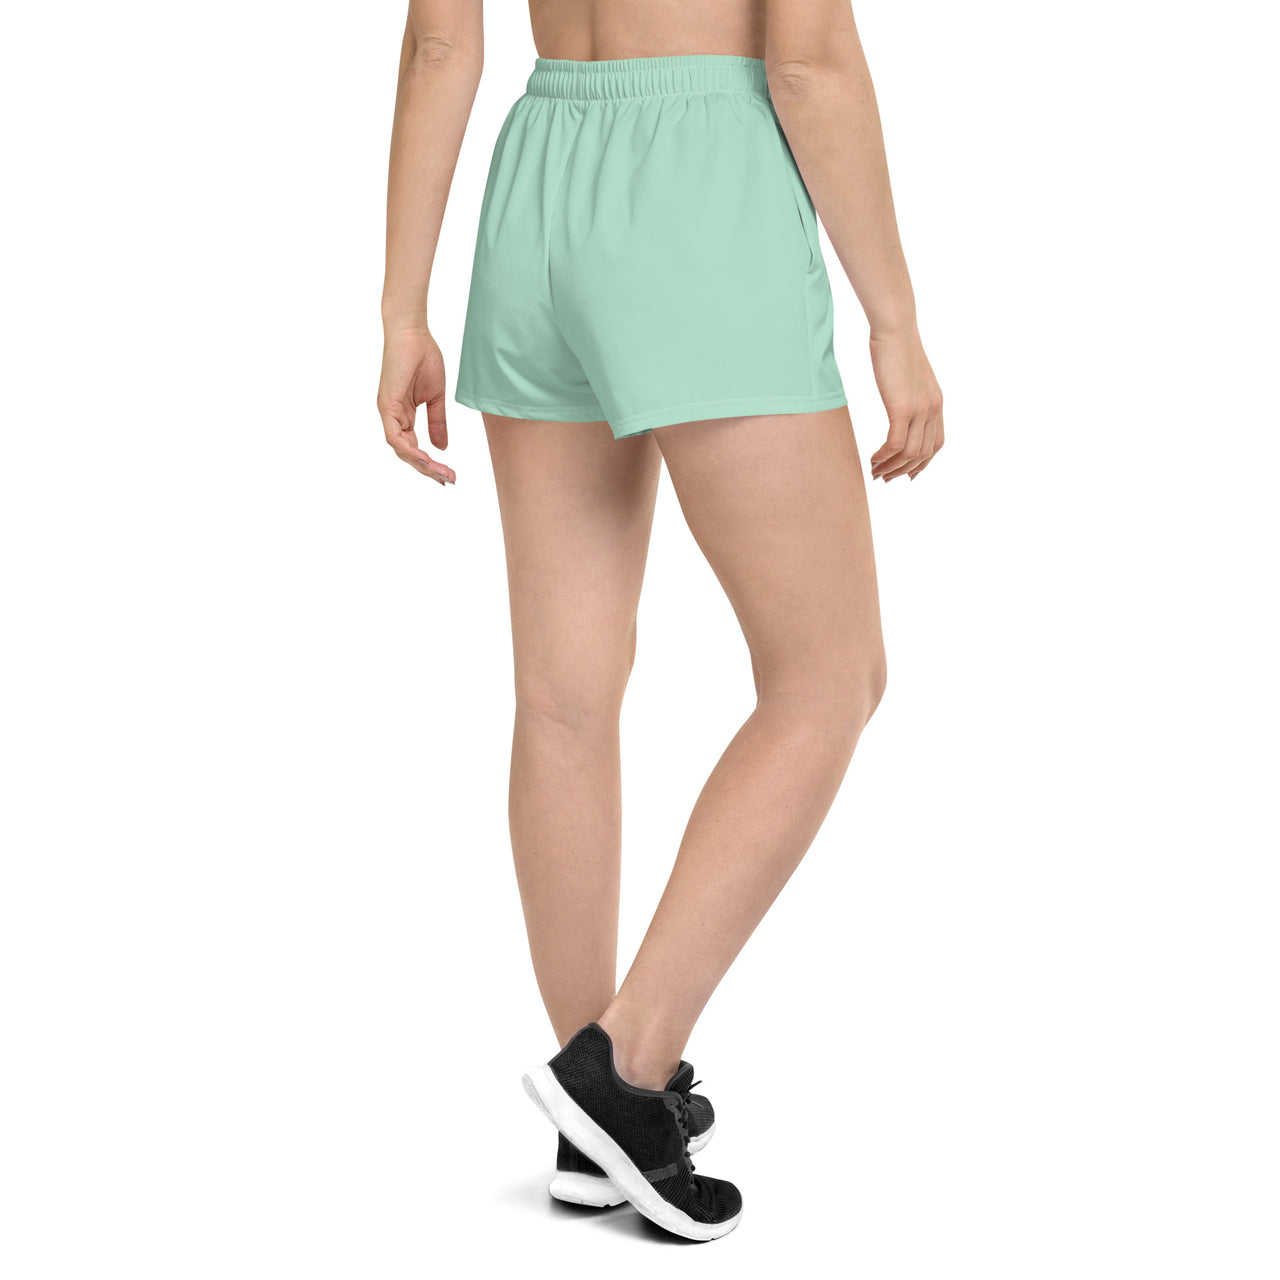 Women’s Recycled Solid Athletic Shorts - Pistachio SHAVA CO